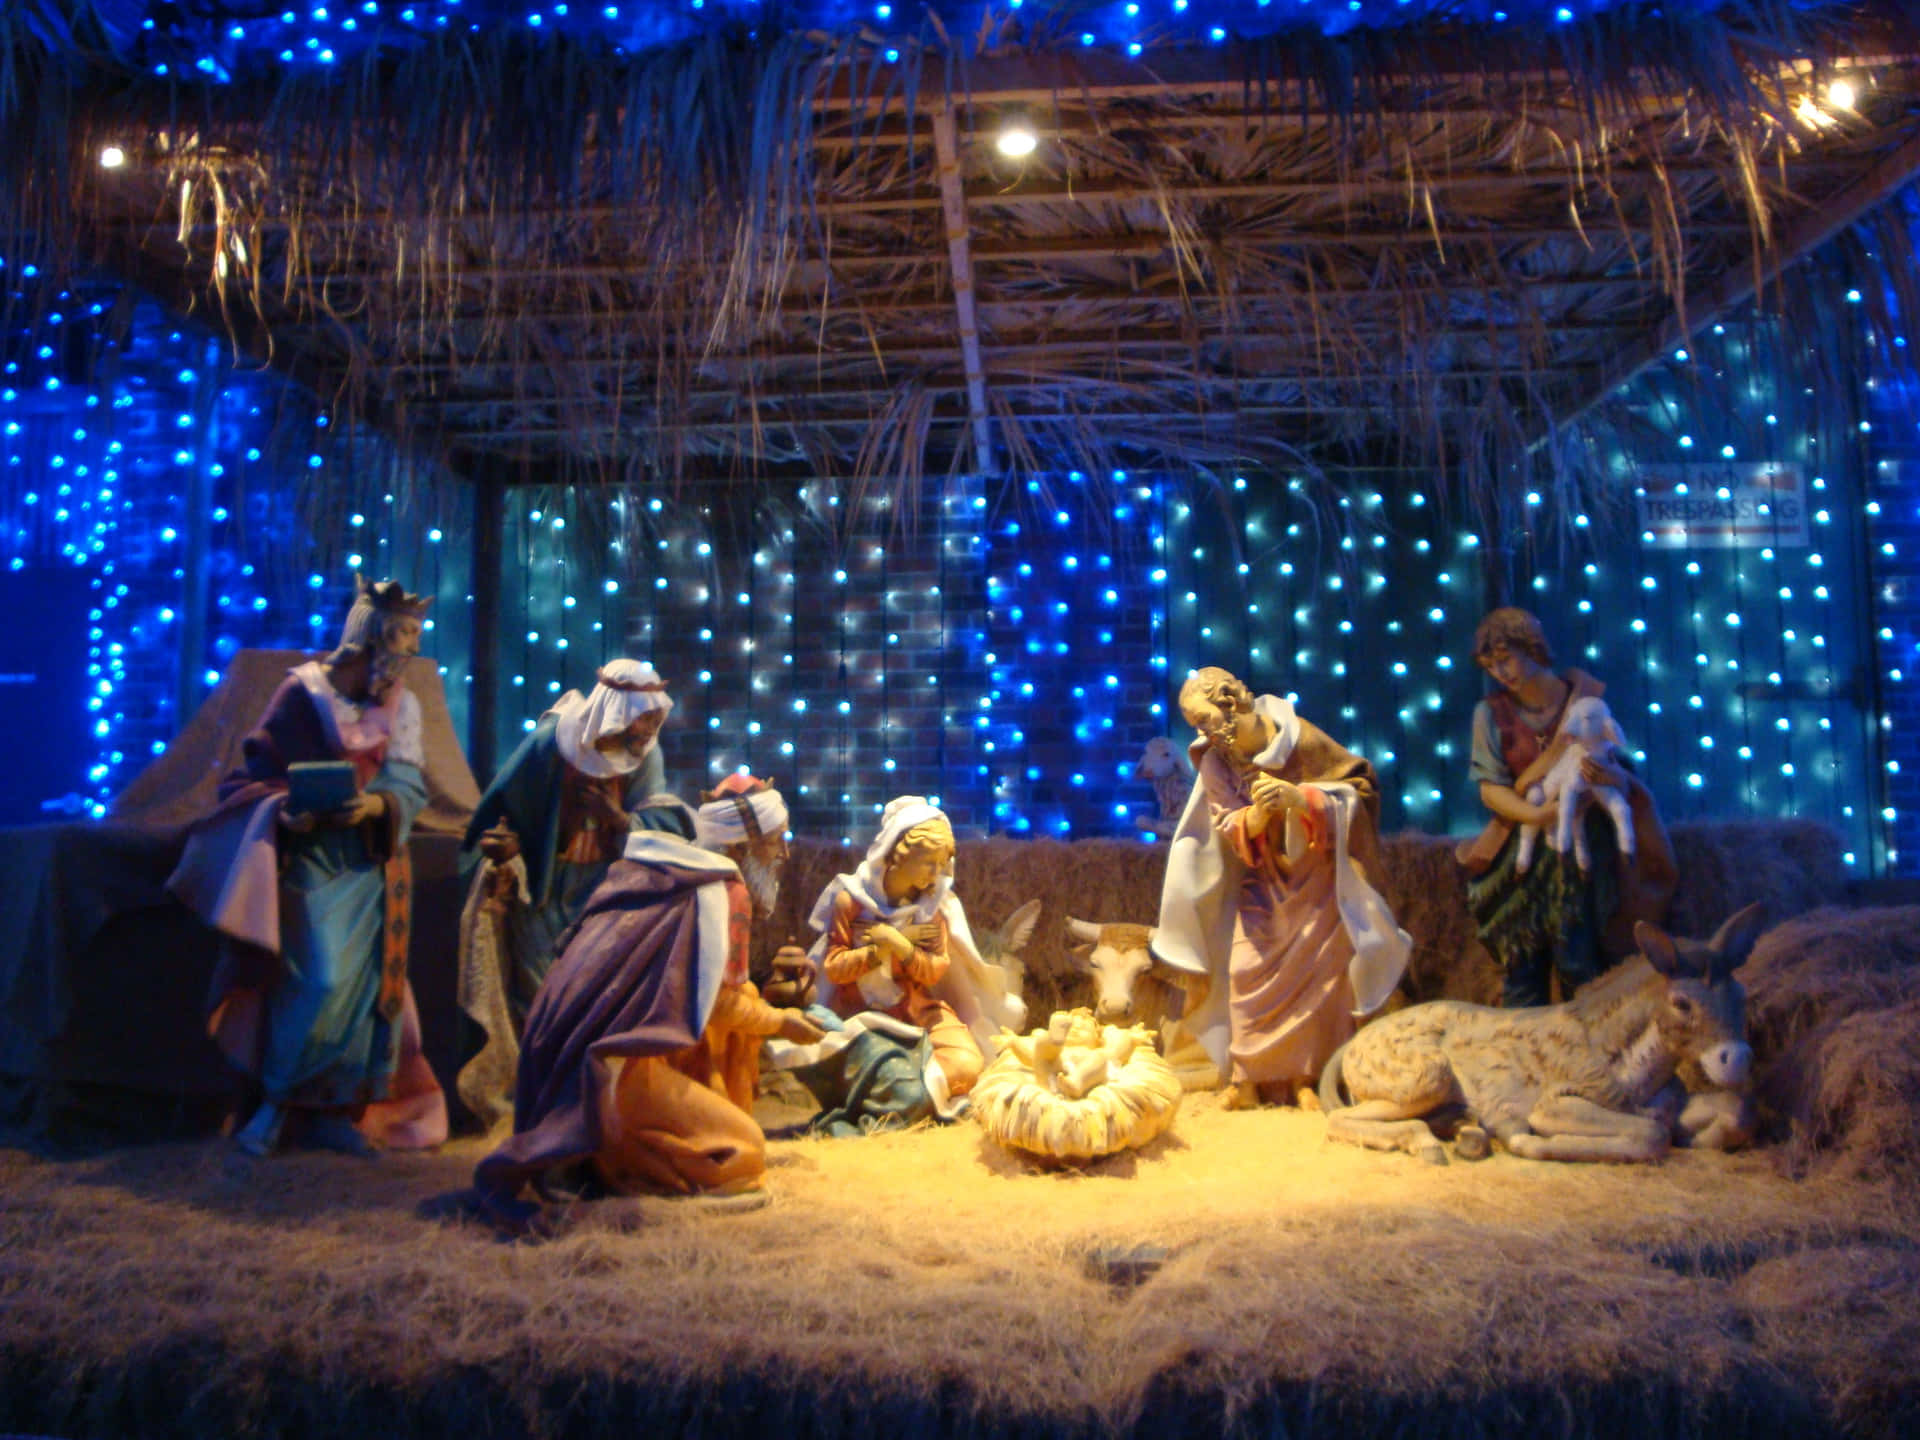 A peaceful nativity scene of the baby Jesus, Mary, and Joseph.